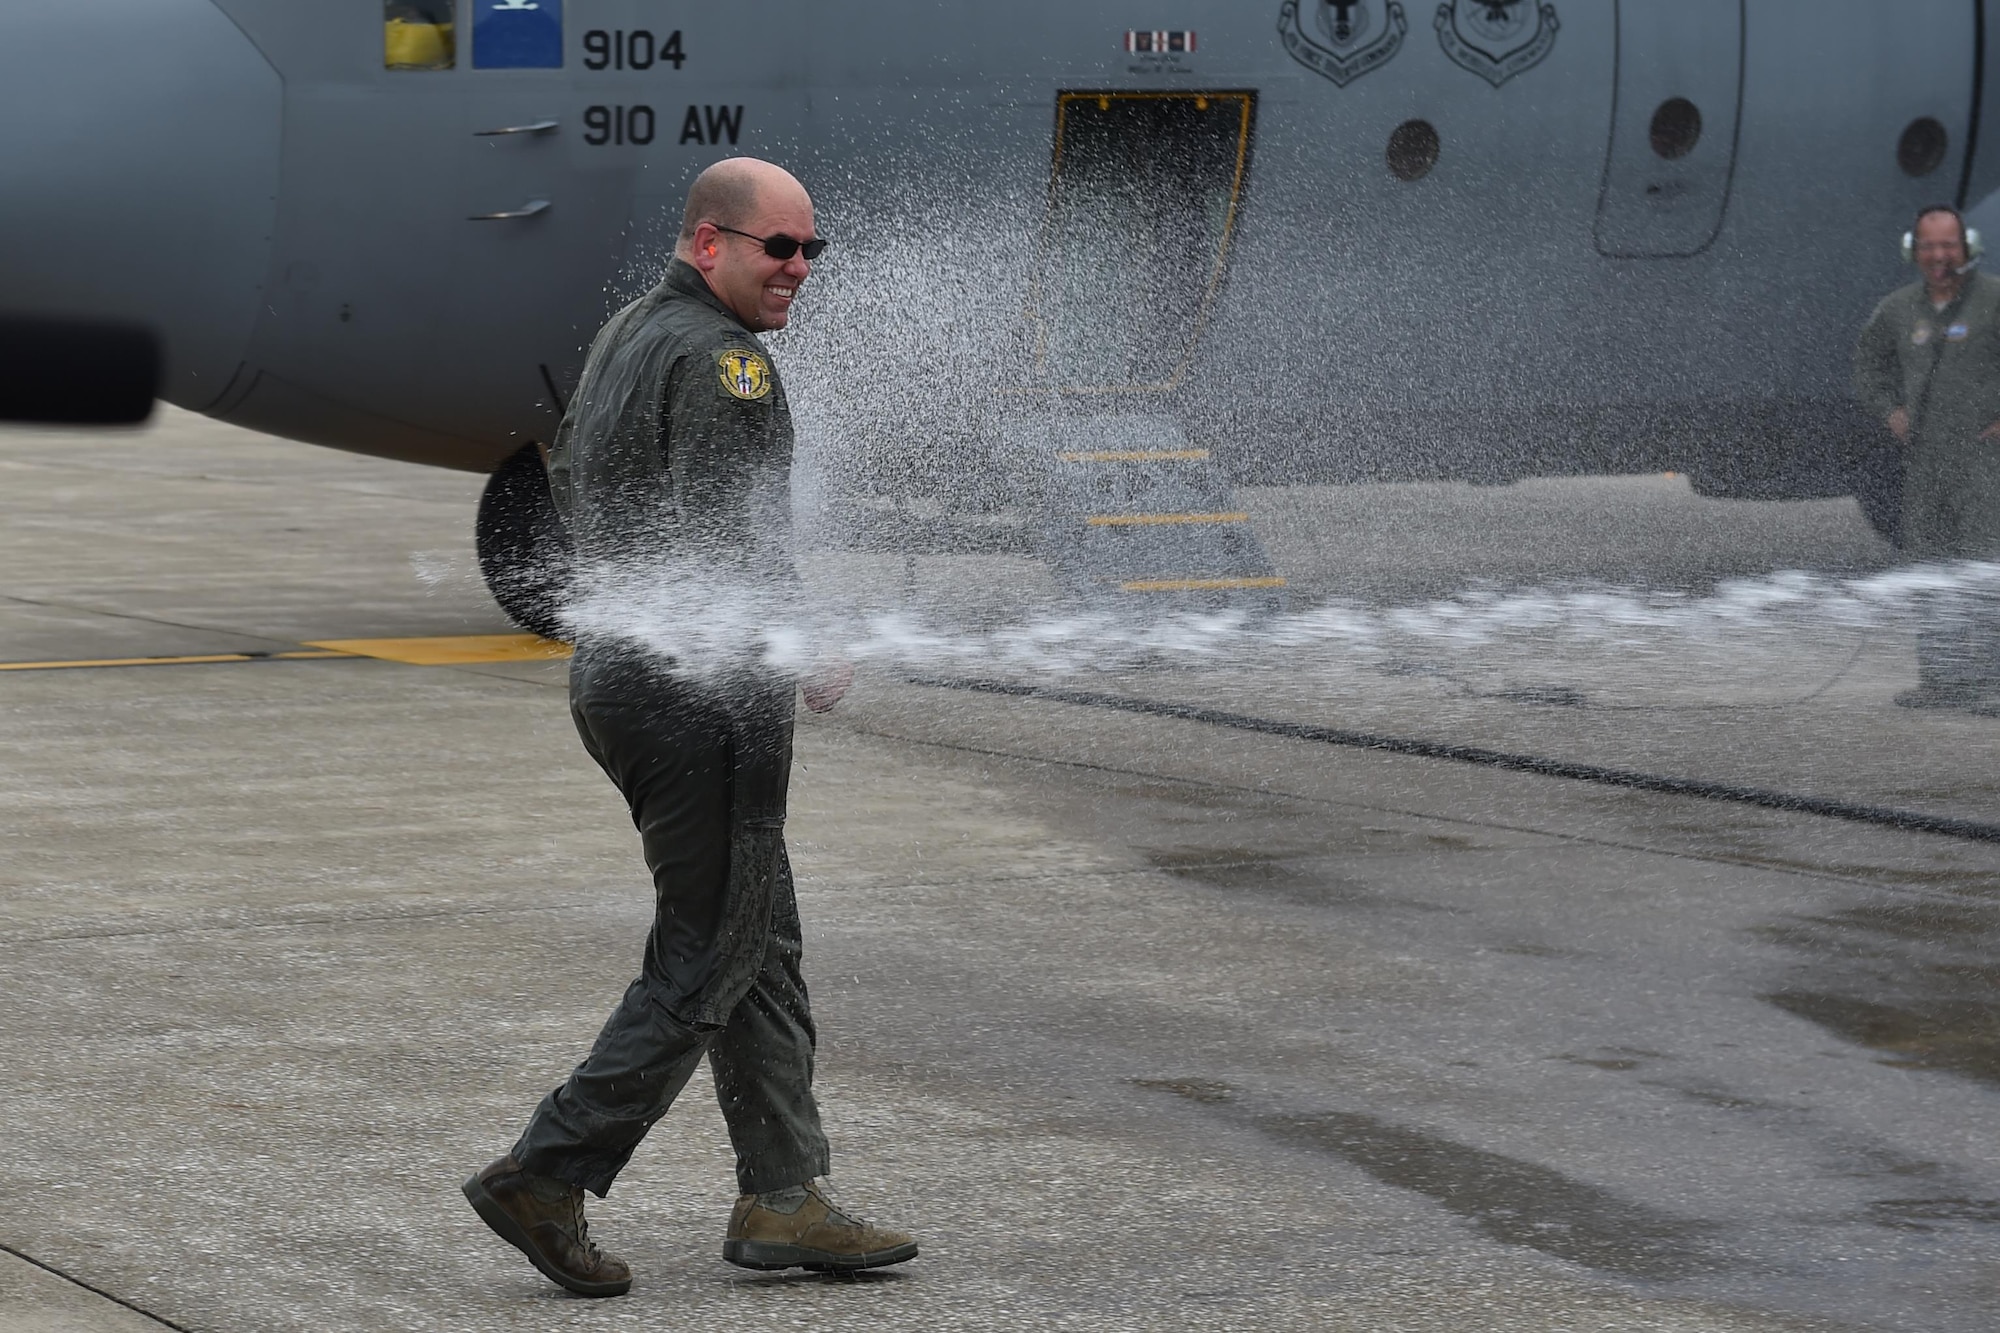 Col. James Dignan, 910th Airlift Wing commander, gets hosed down by family members after his final flight with the unit here, Oct. 2, 2016. Dignan moved to a new assignment at the Pentagon Oct. 18, after commanding YARS for nearly four years. (U.S. Air Force photo/Tech. Sgt. Jim Brock)